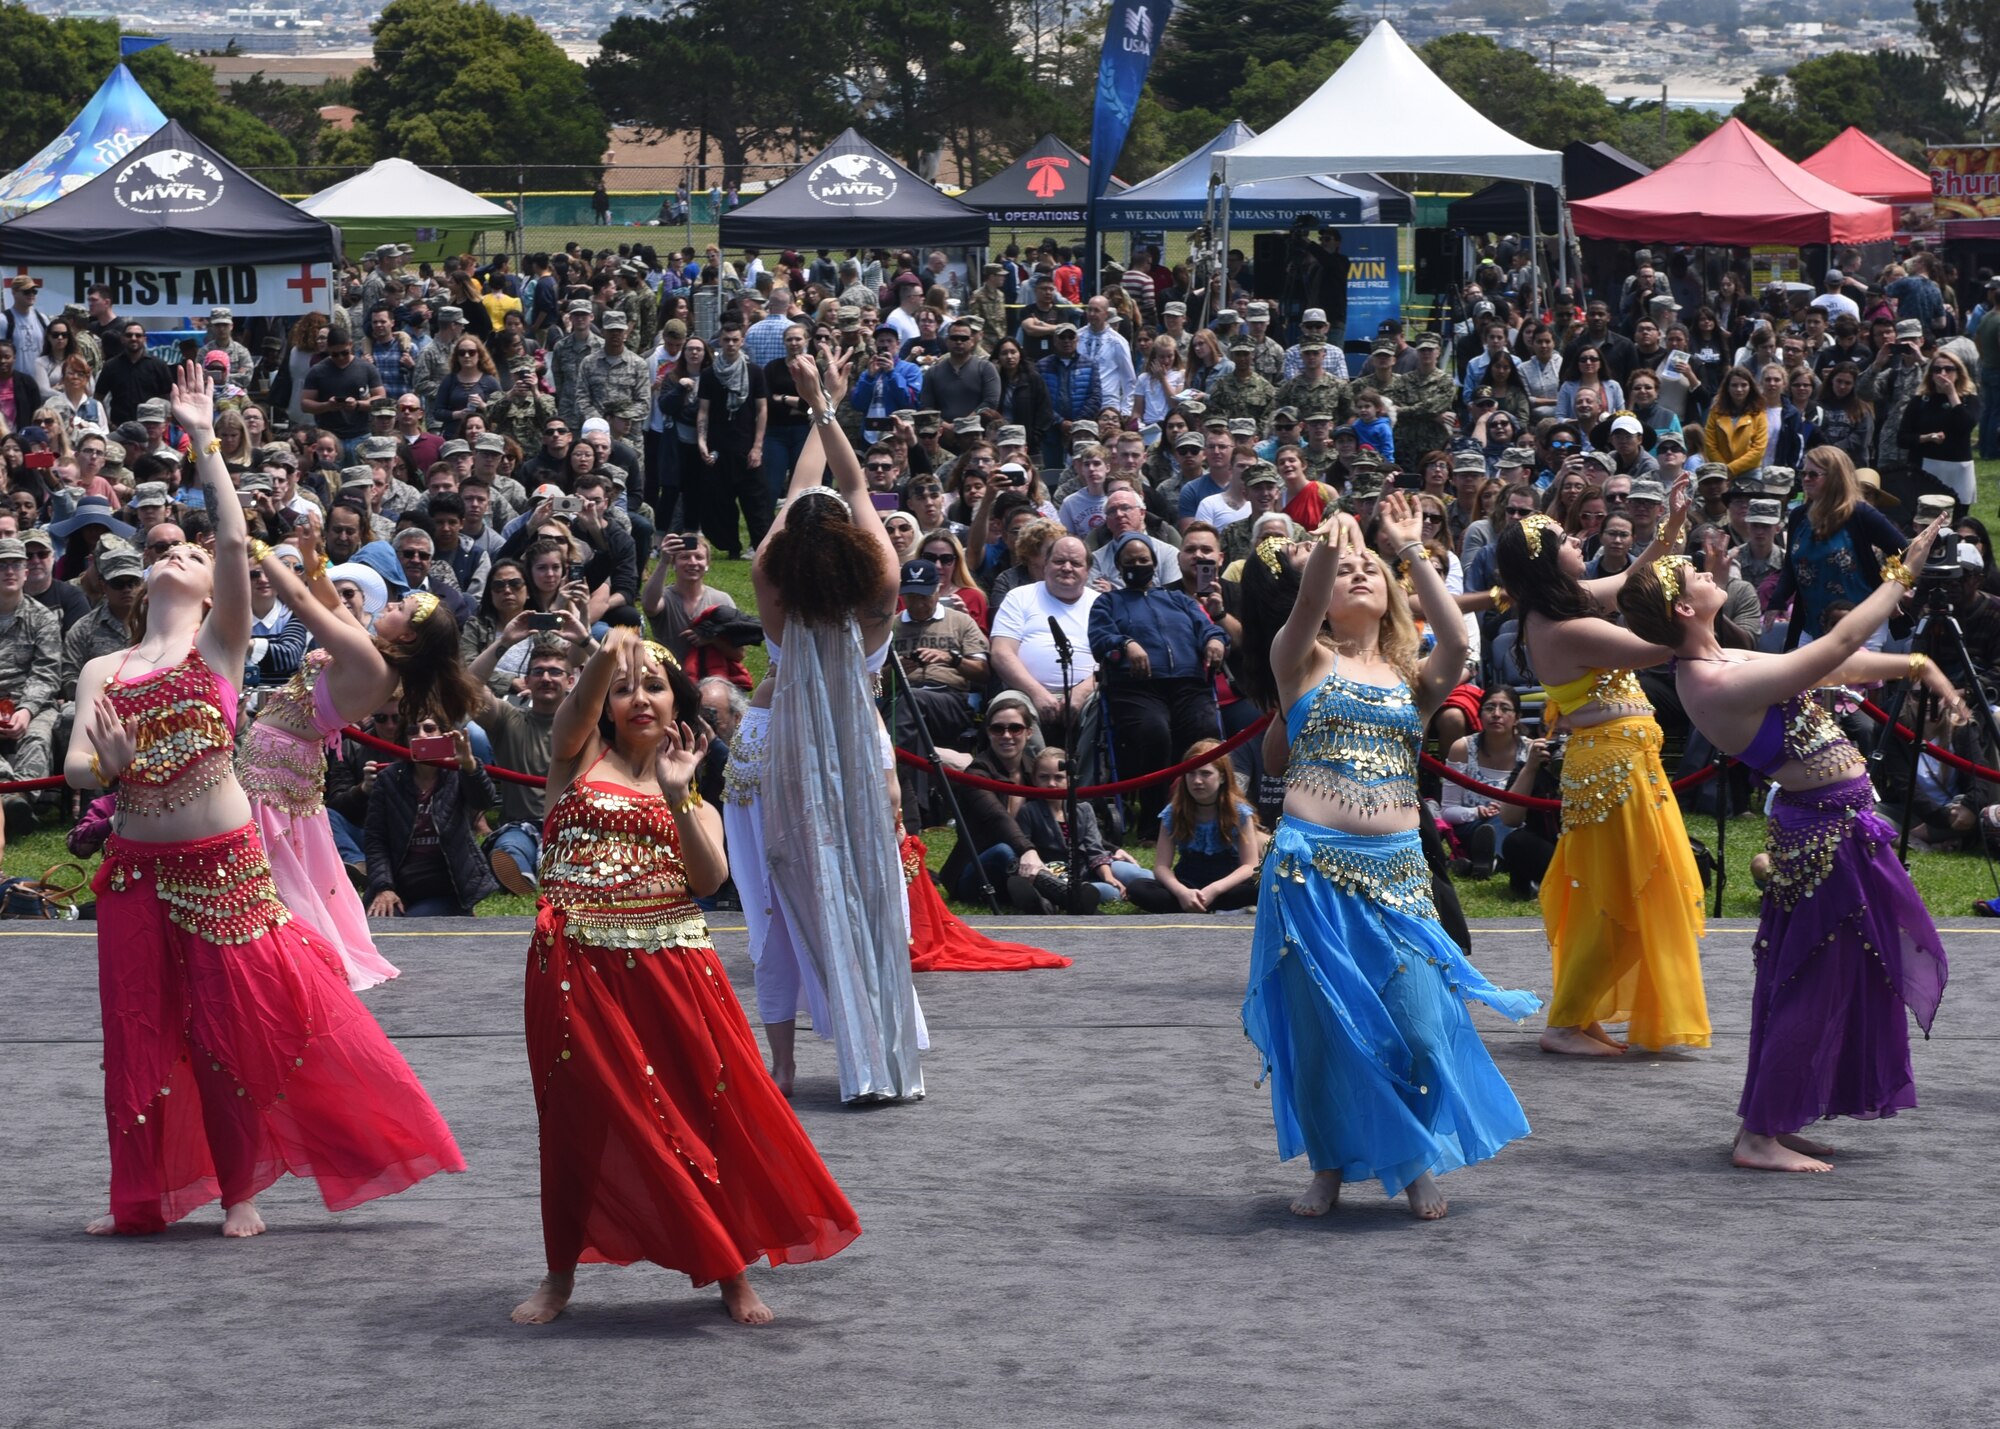 Students from the Egyptian class dance during Language Day at Presidio of Monterey, Calif., May 10, 2019. Over the years, Language Day has grown since the original celebration in 1952. (U.S. Air Force photo by Airman 1st Class Zachary Chapman/Released)